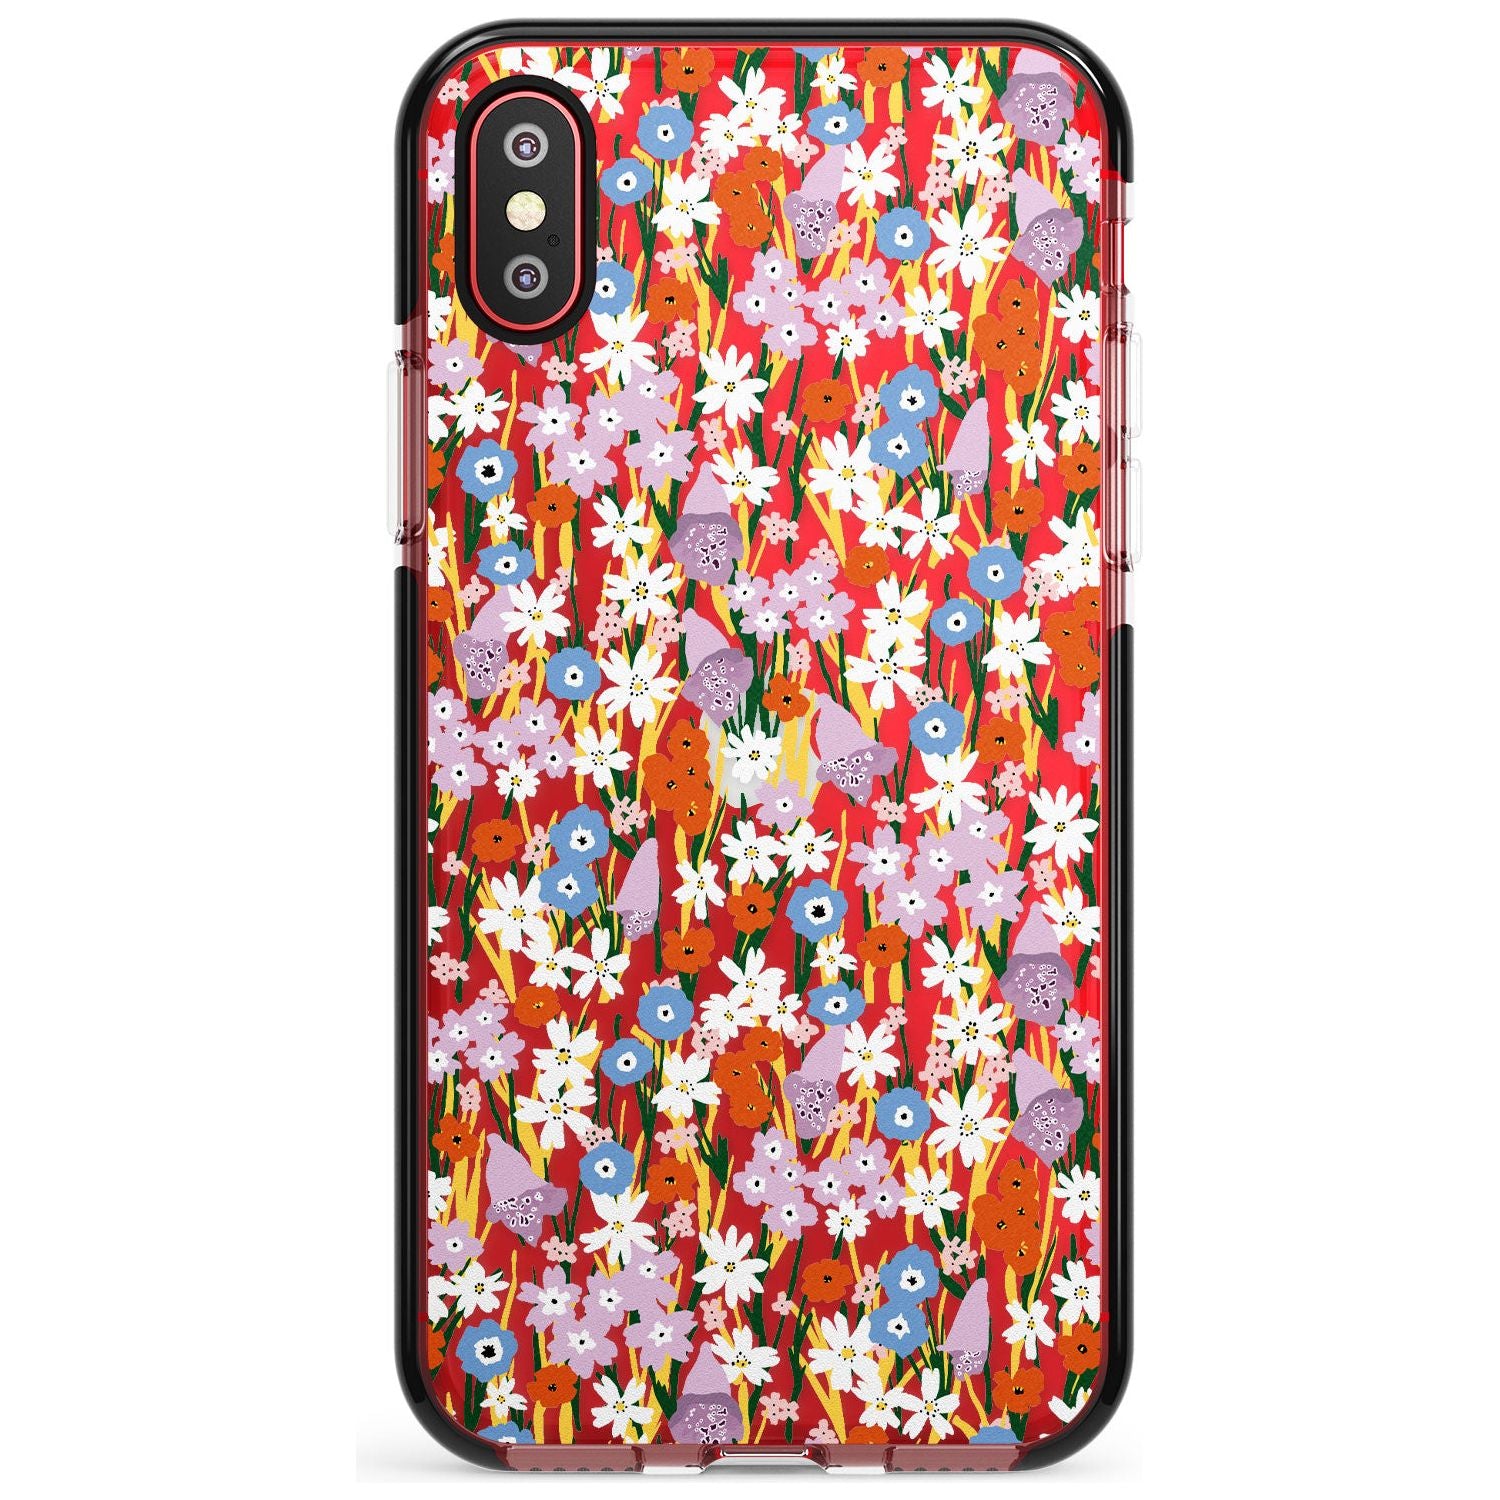 Energetic Floral Mix: Transparent Pink Fade Impact Phone Case for iPhone X XS Max XR